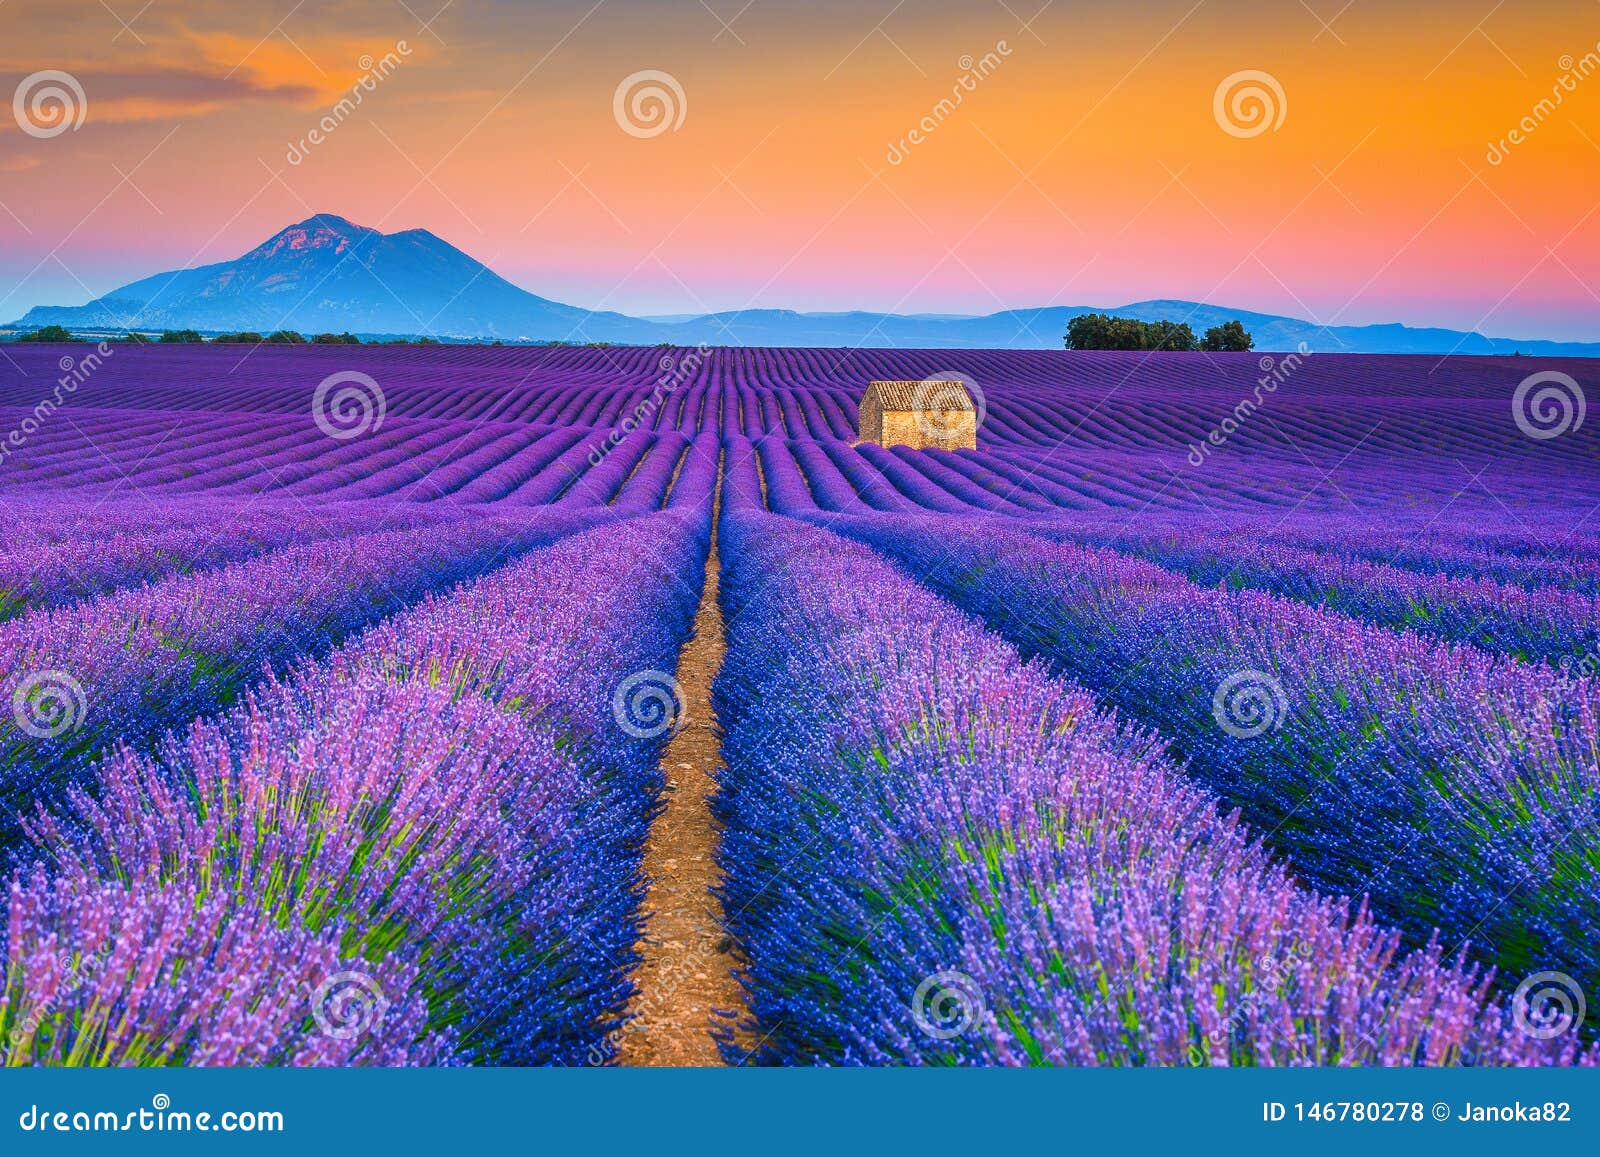 wonderful summer landscape with lavender fields in provence, valensole, france